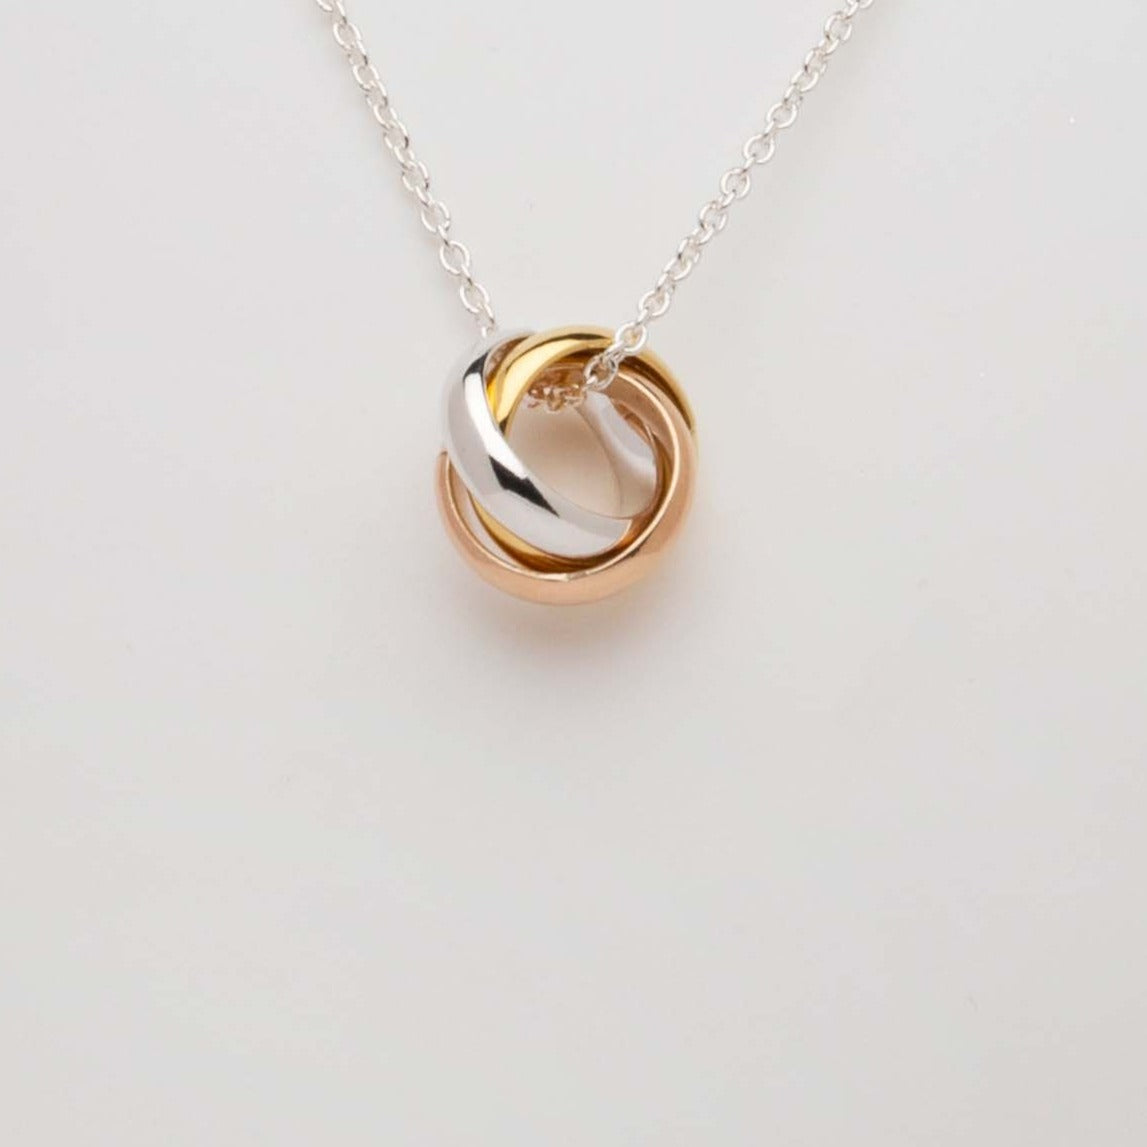 Solitaire Ring Pendant Necklace | D'heygere